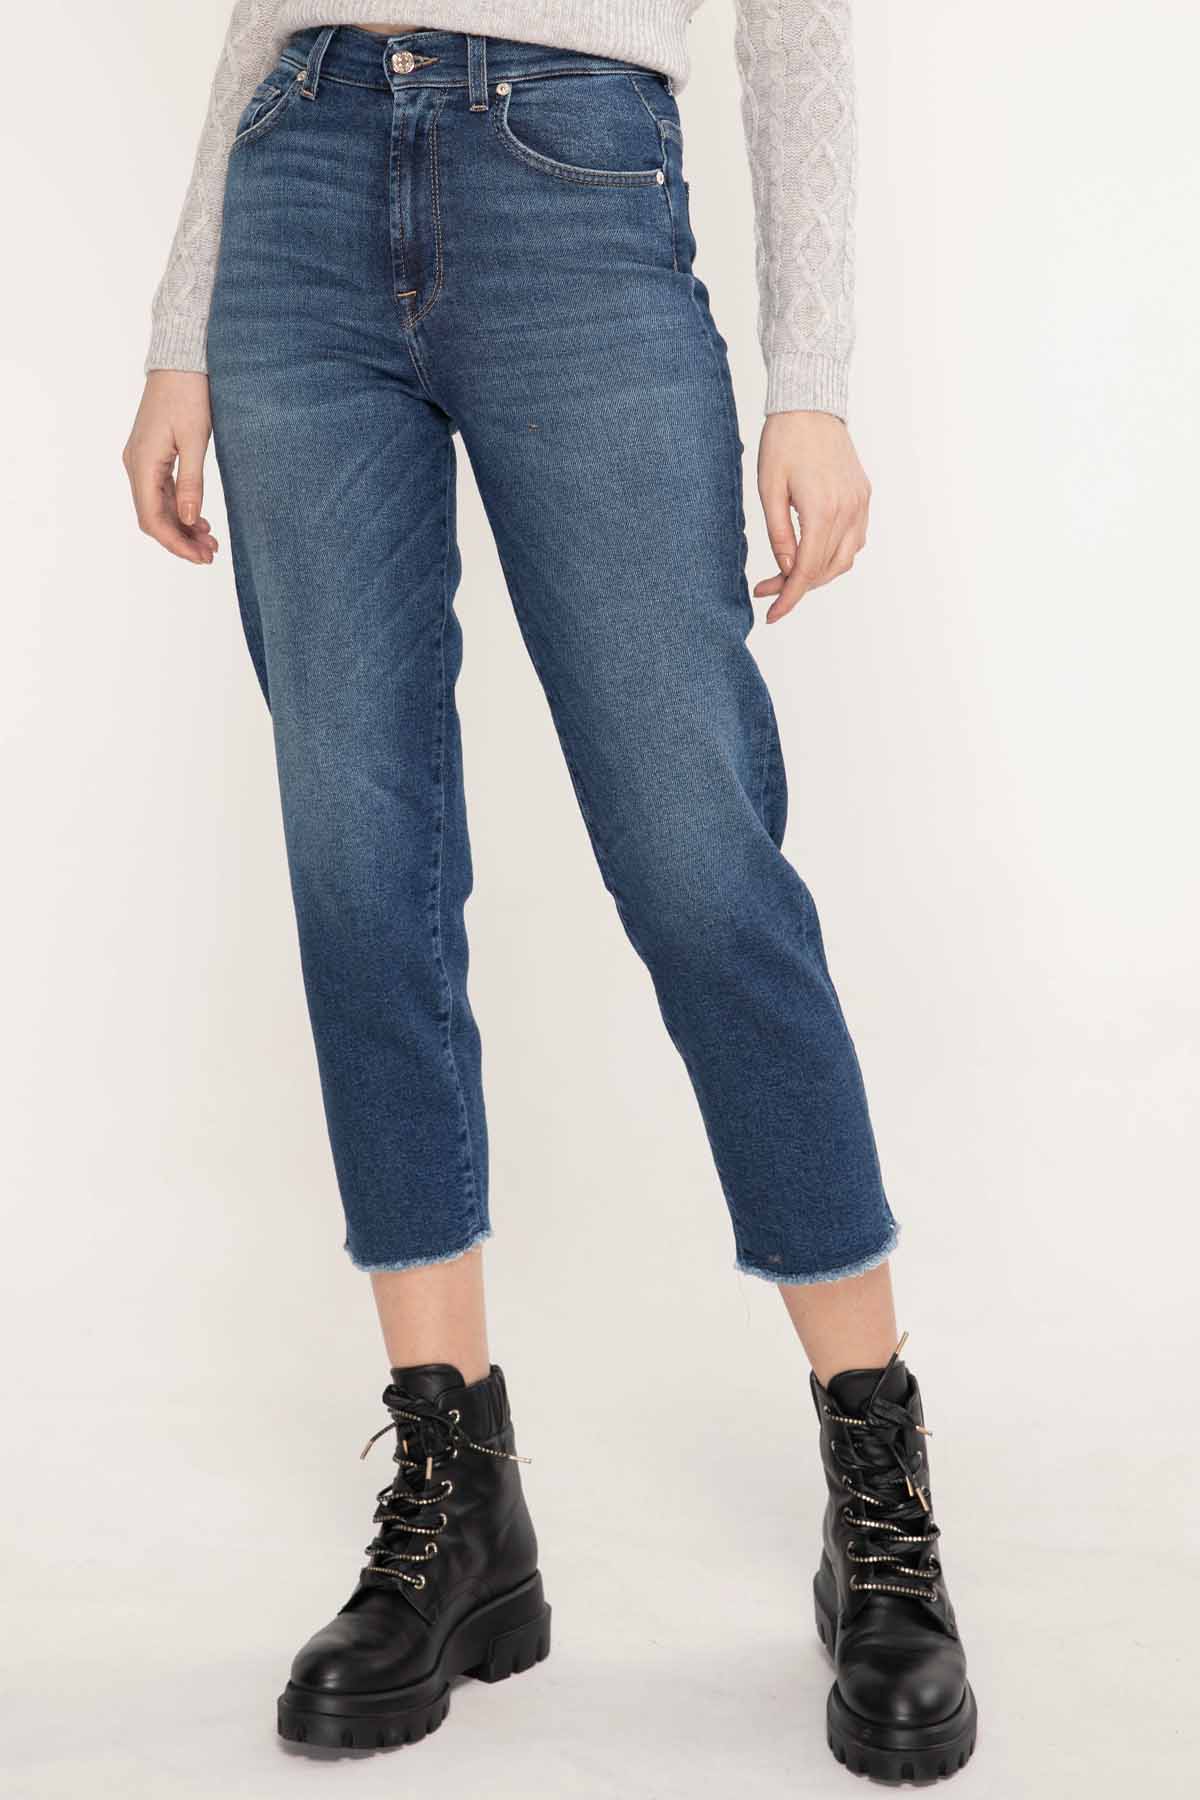 7 For All Mankind Luxe Vintage Jeans-Libas Trendy Fashion Store